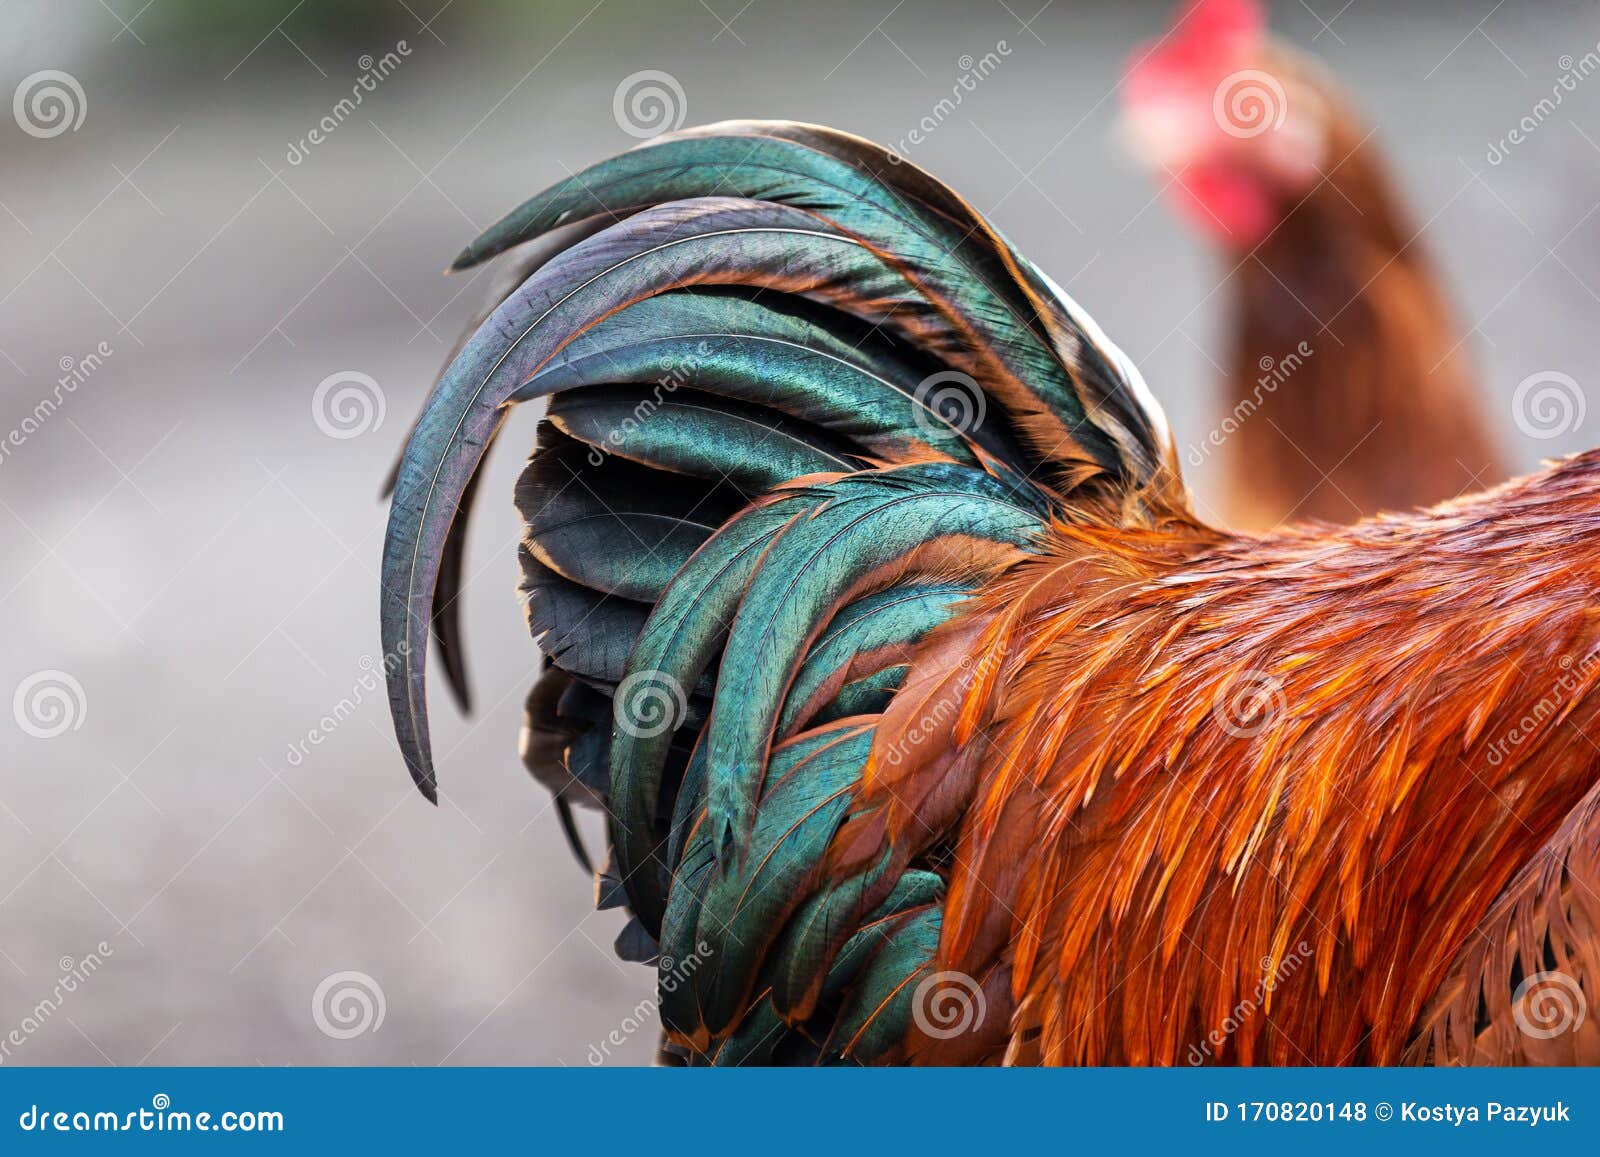 Beautiful Rooster Tail with a Metallic Sheen Stock Photo - Image